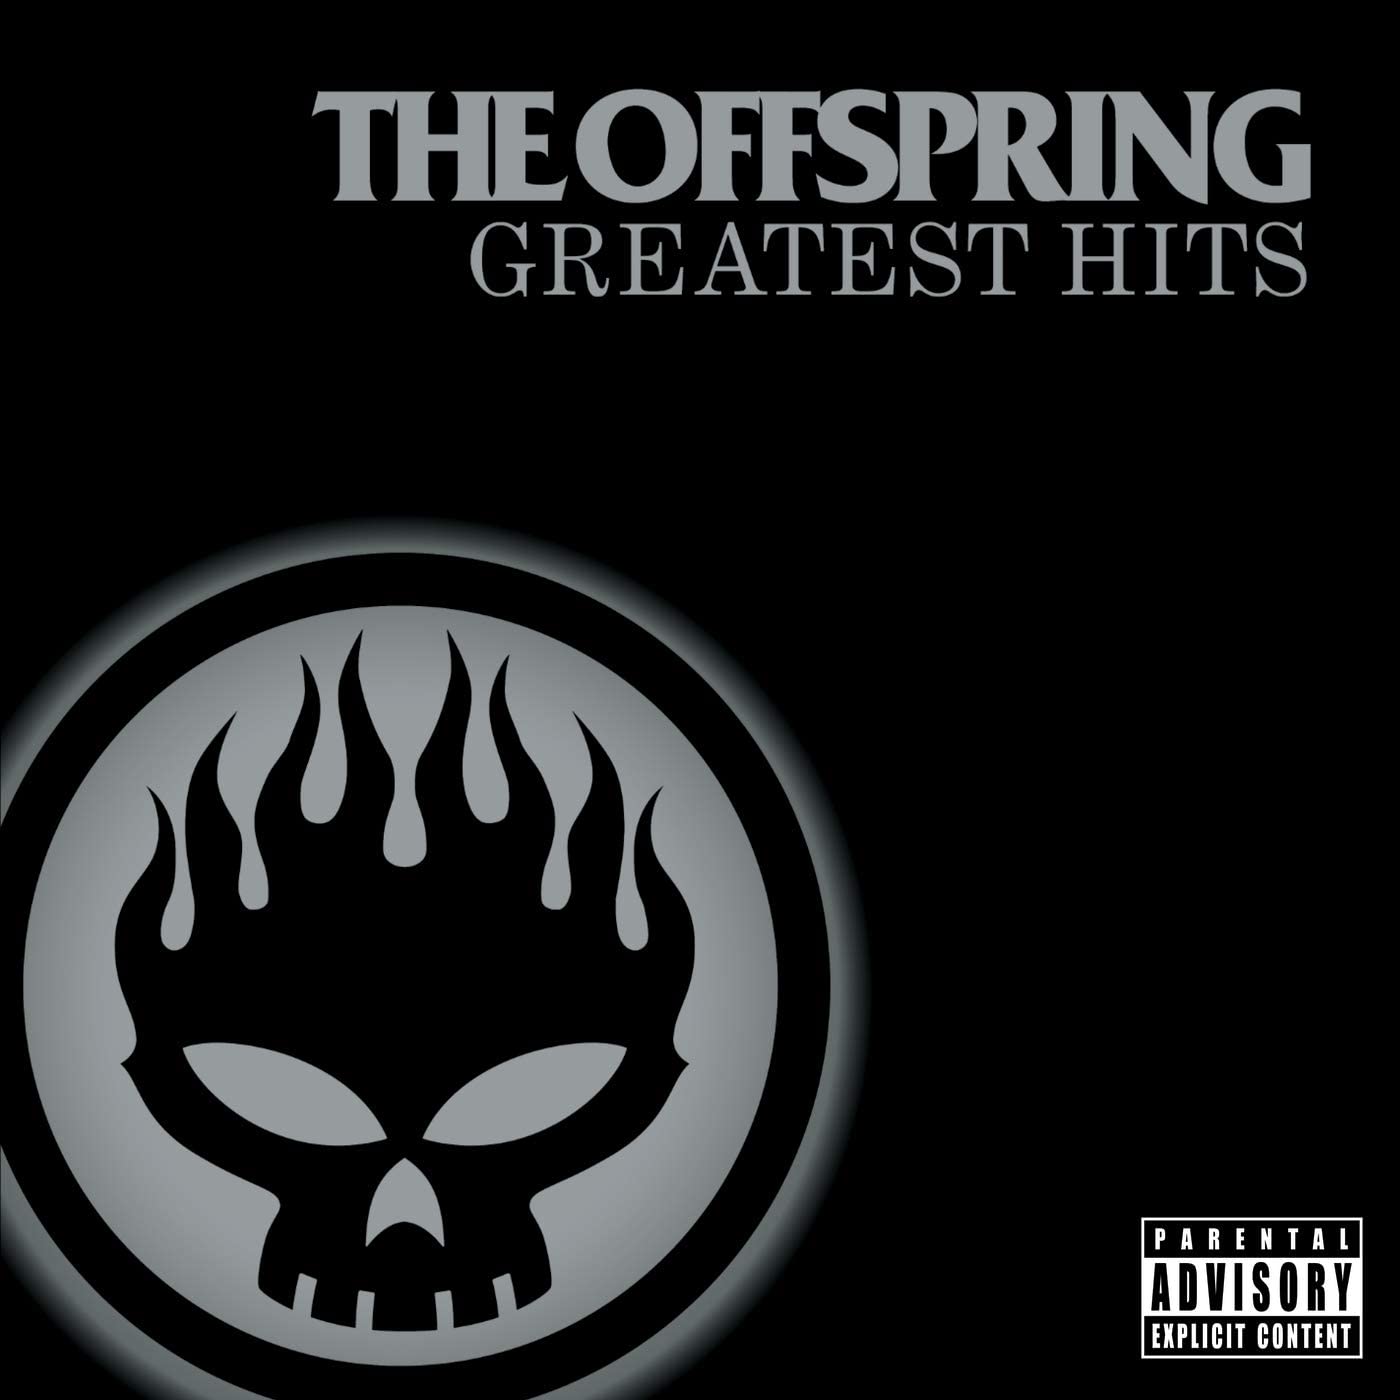 The Offspring: Greatest Hits - Vinyl | The Offspring